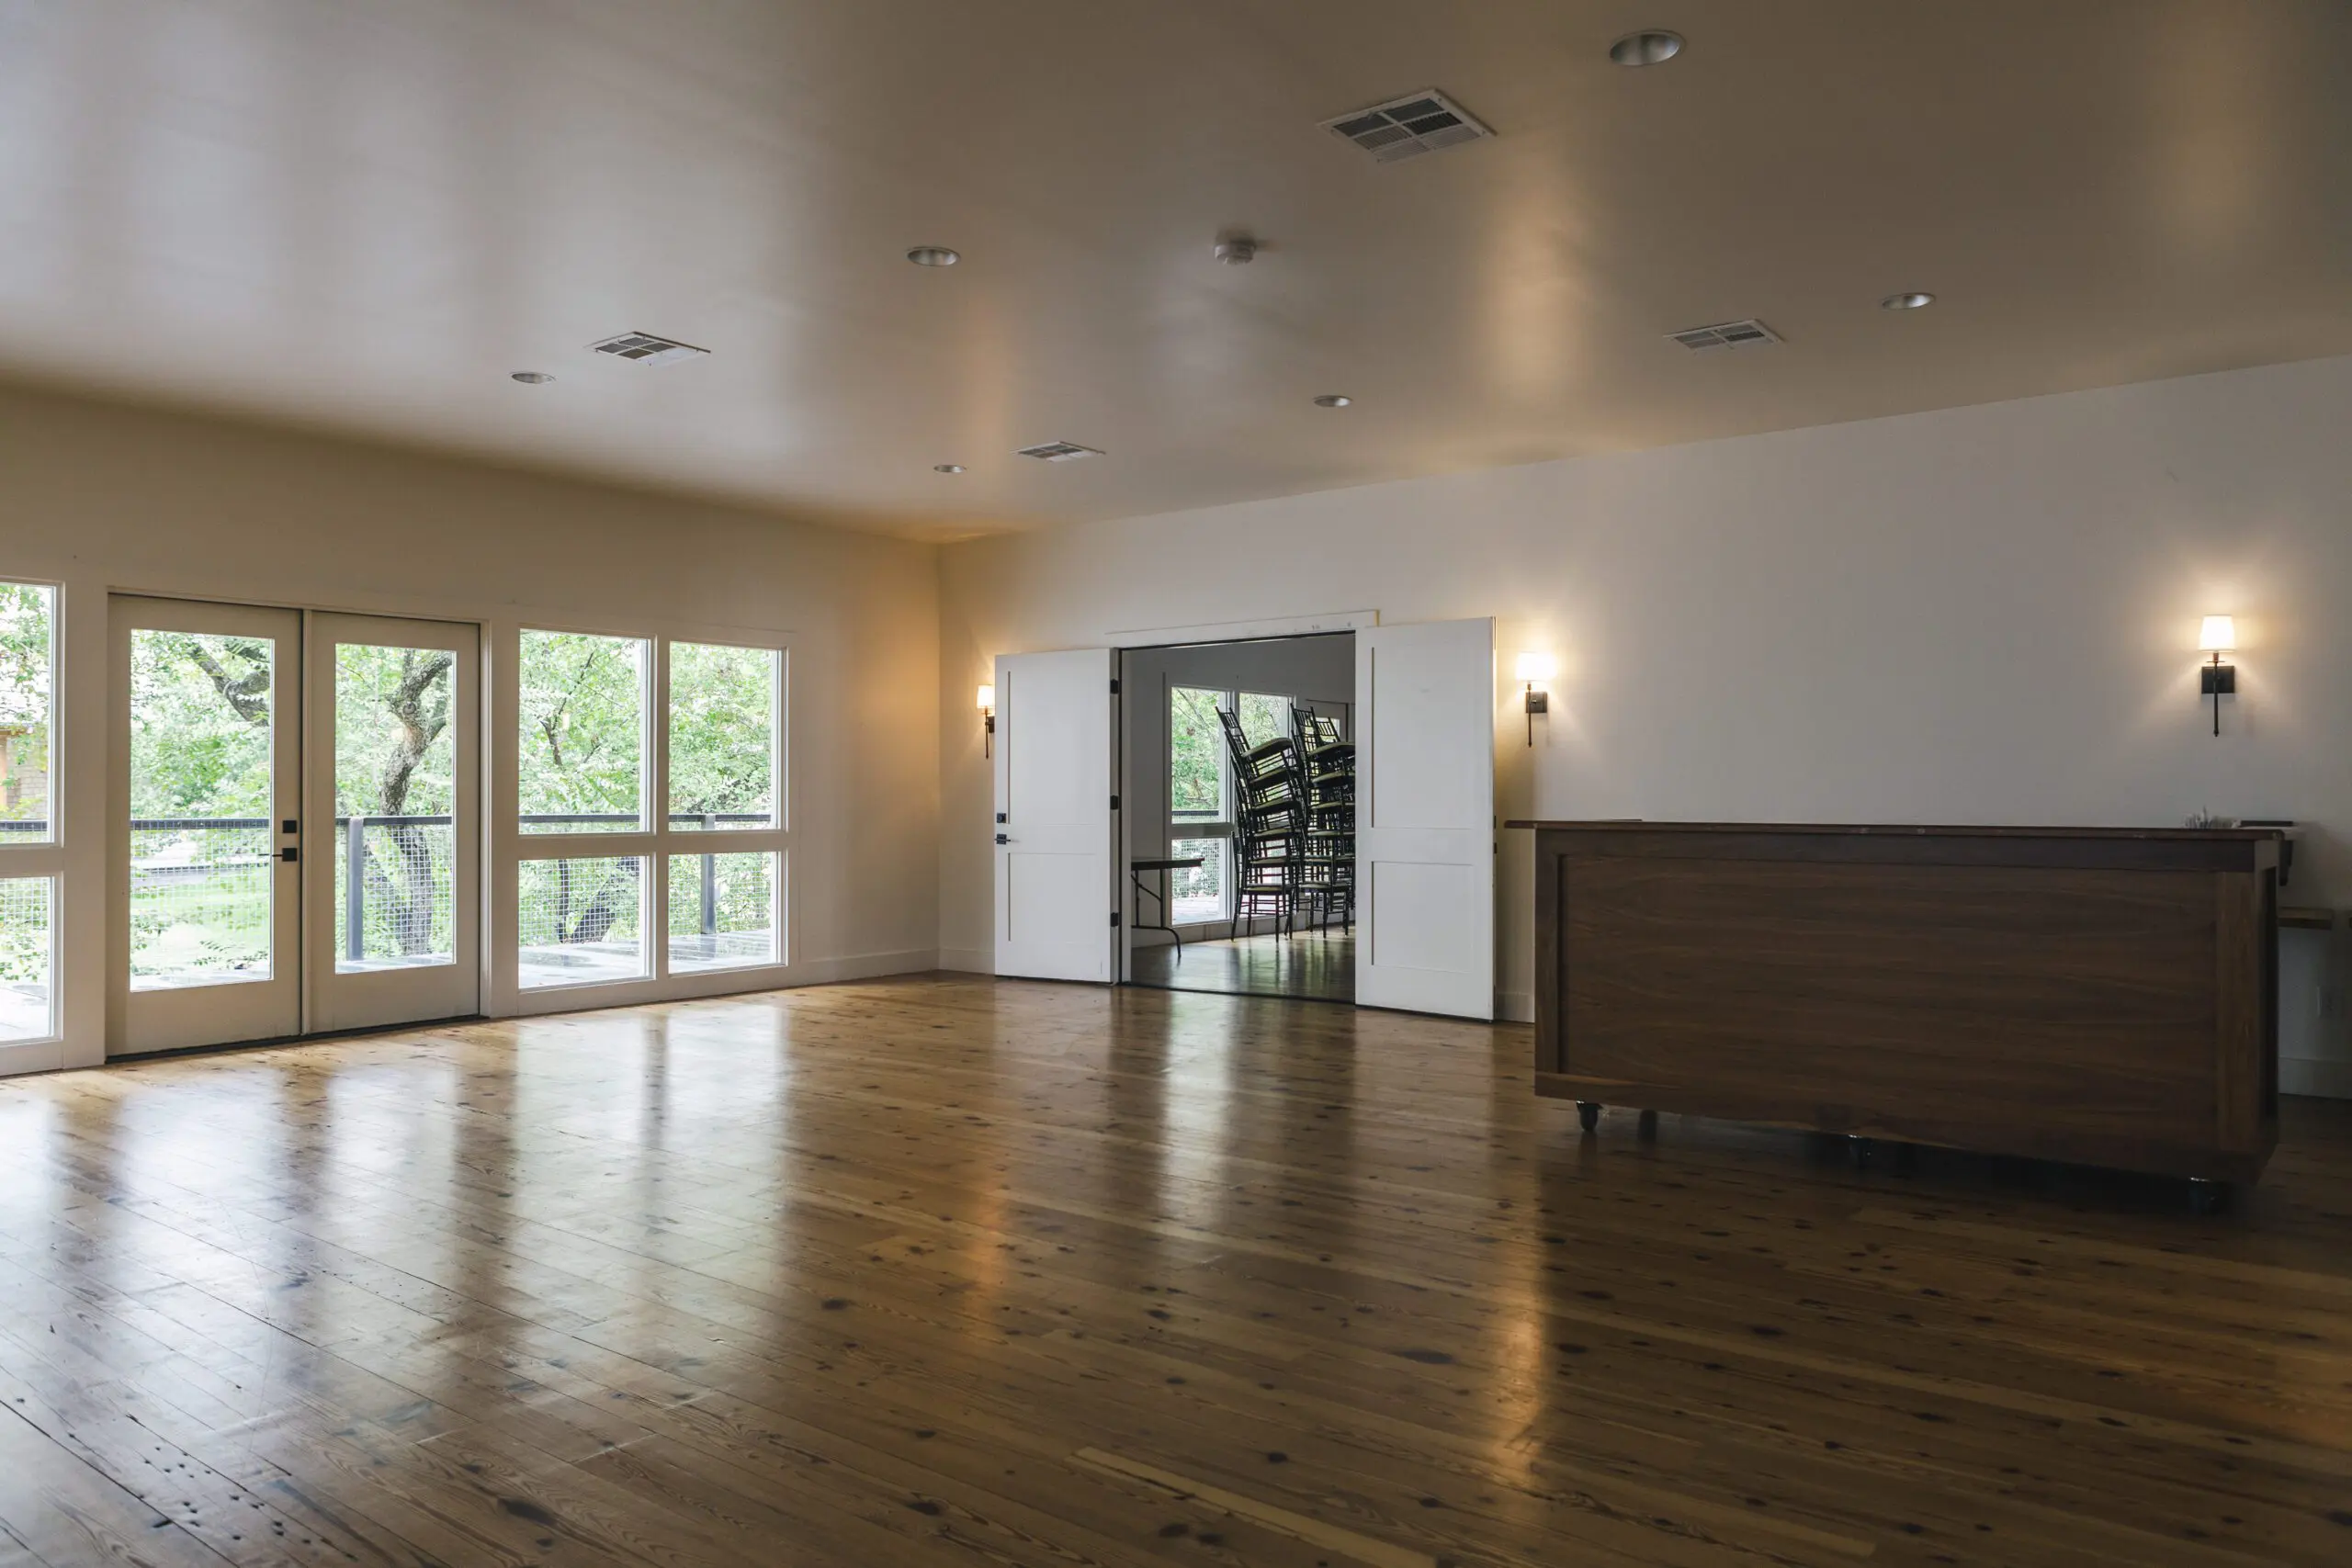 Spacious event room with hardwood floors and large windows at Stagecoach Inn.